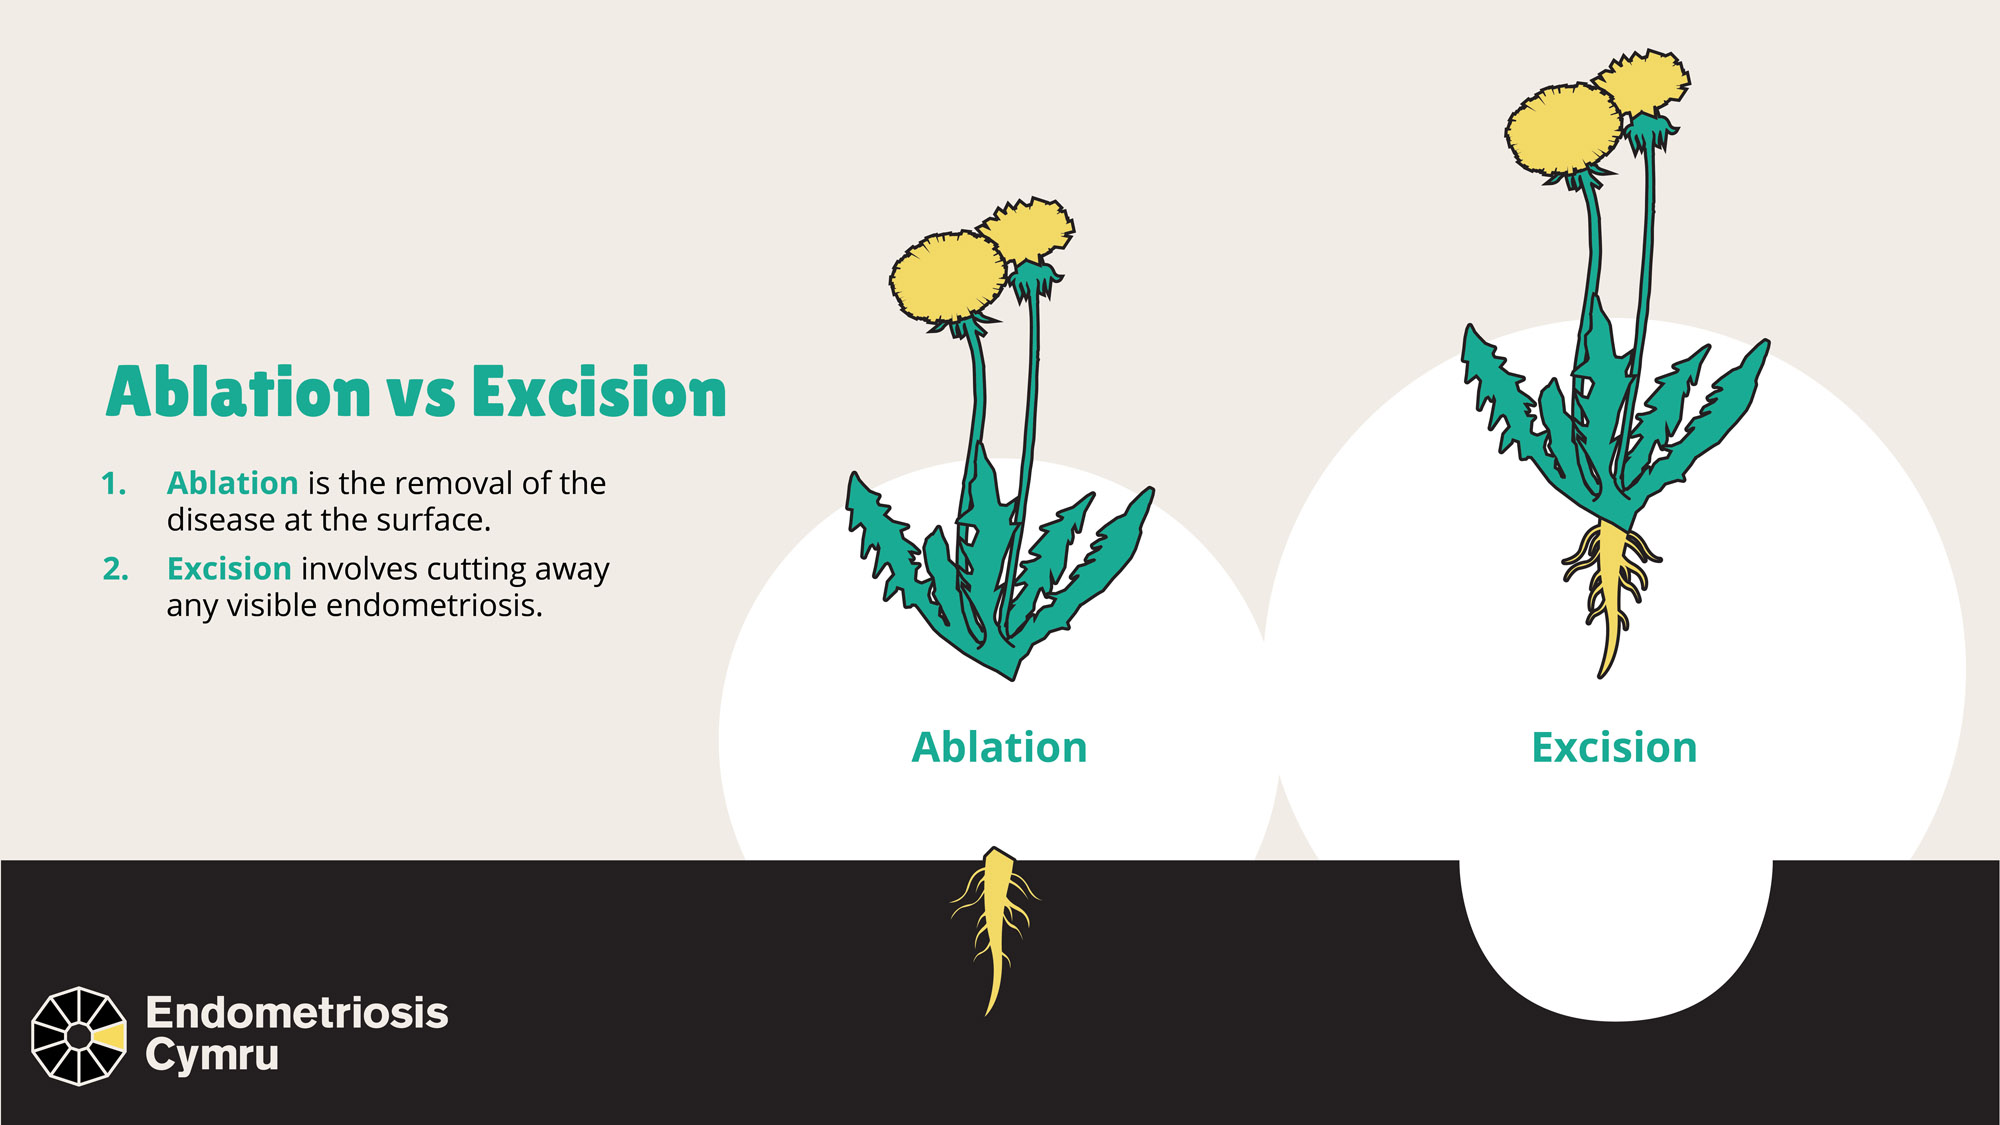 The process of ablation vs excision is illustrated using the image of a flower. With ablation, the flower is cut at the stalk, leaving the root in the ground. With excision the flower is removed entirely, including the root.